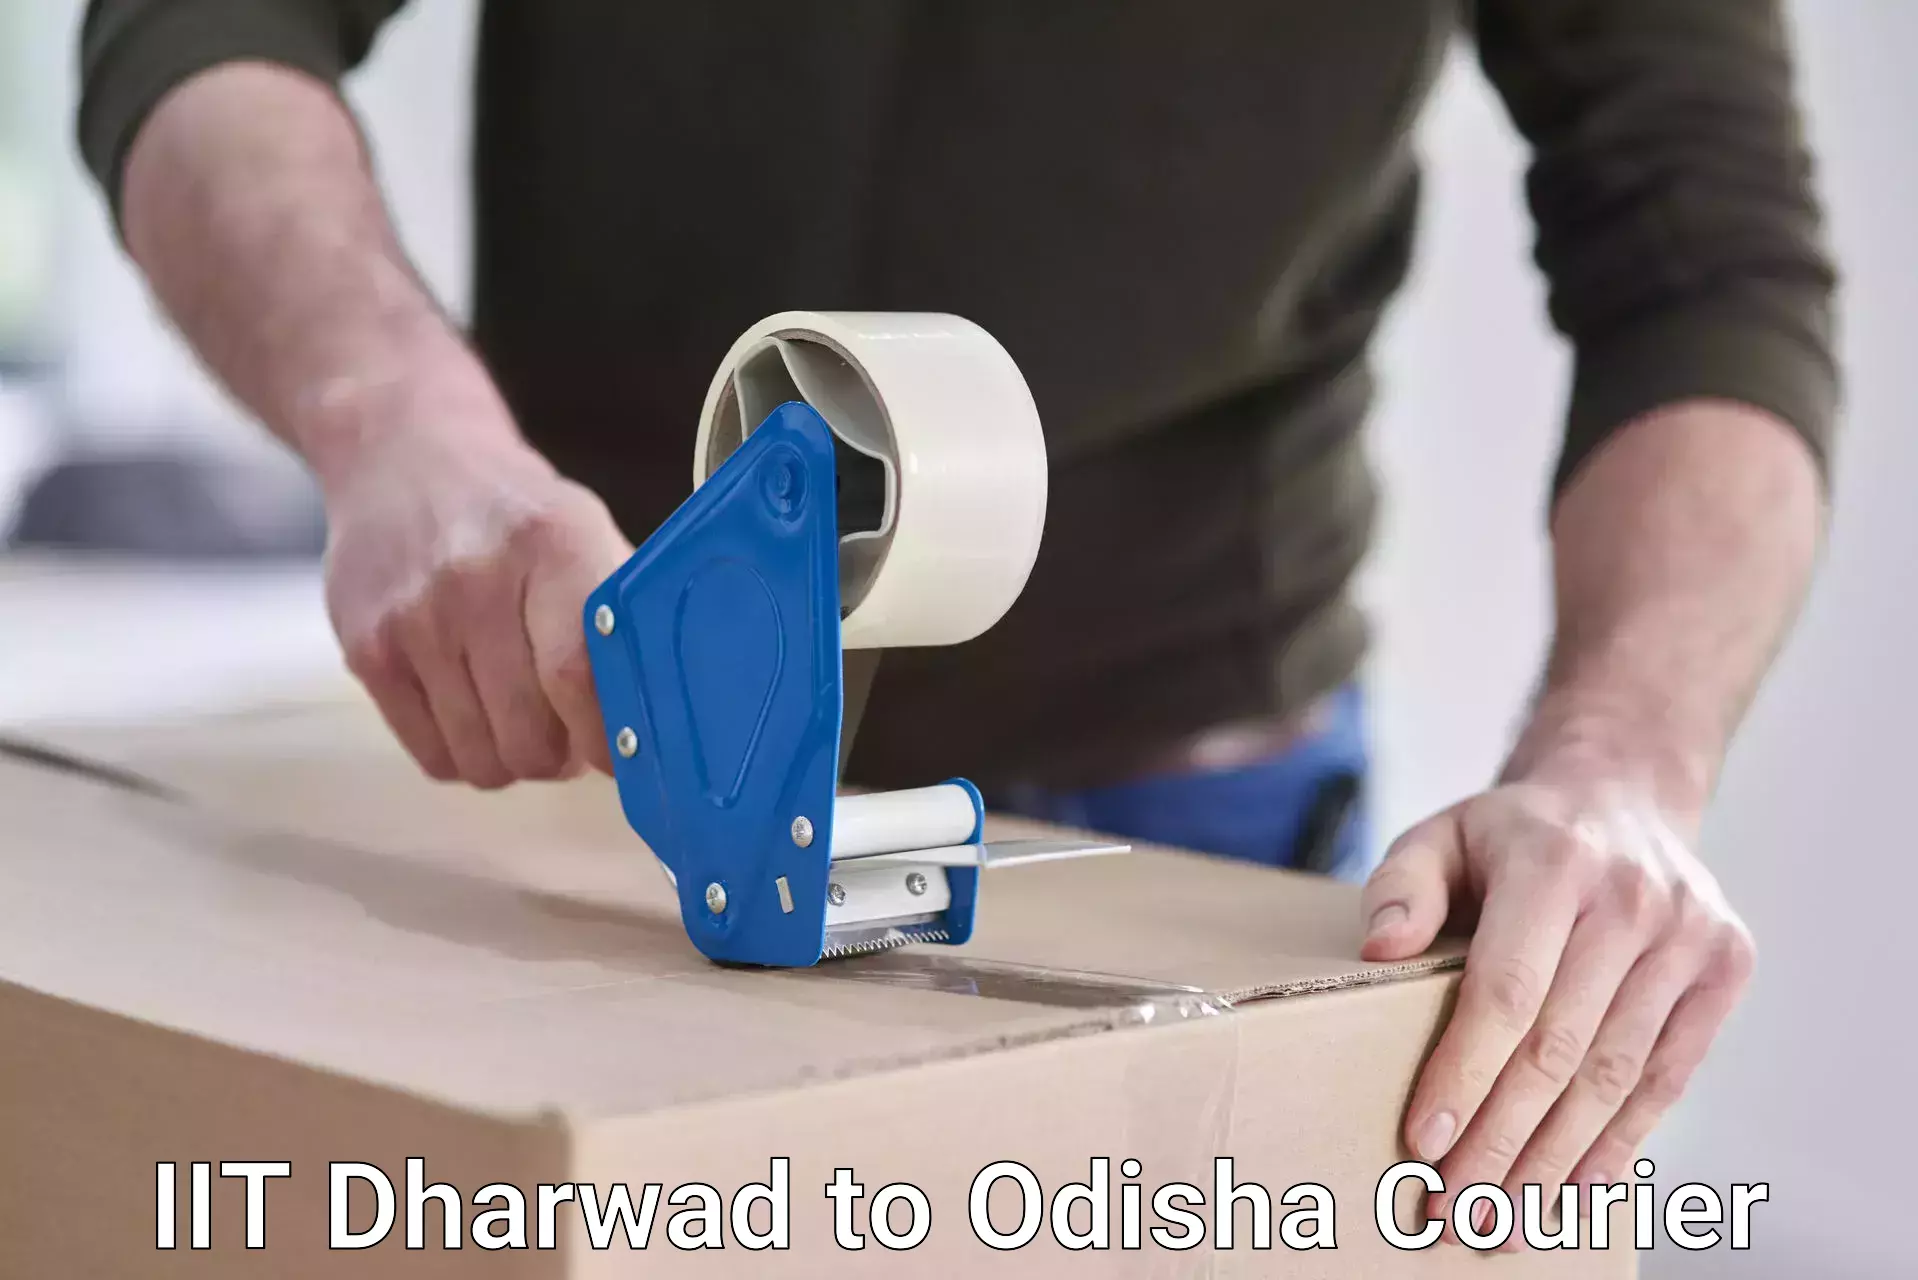 Nationwide parcel services IIT Dharwad to Odisha